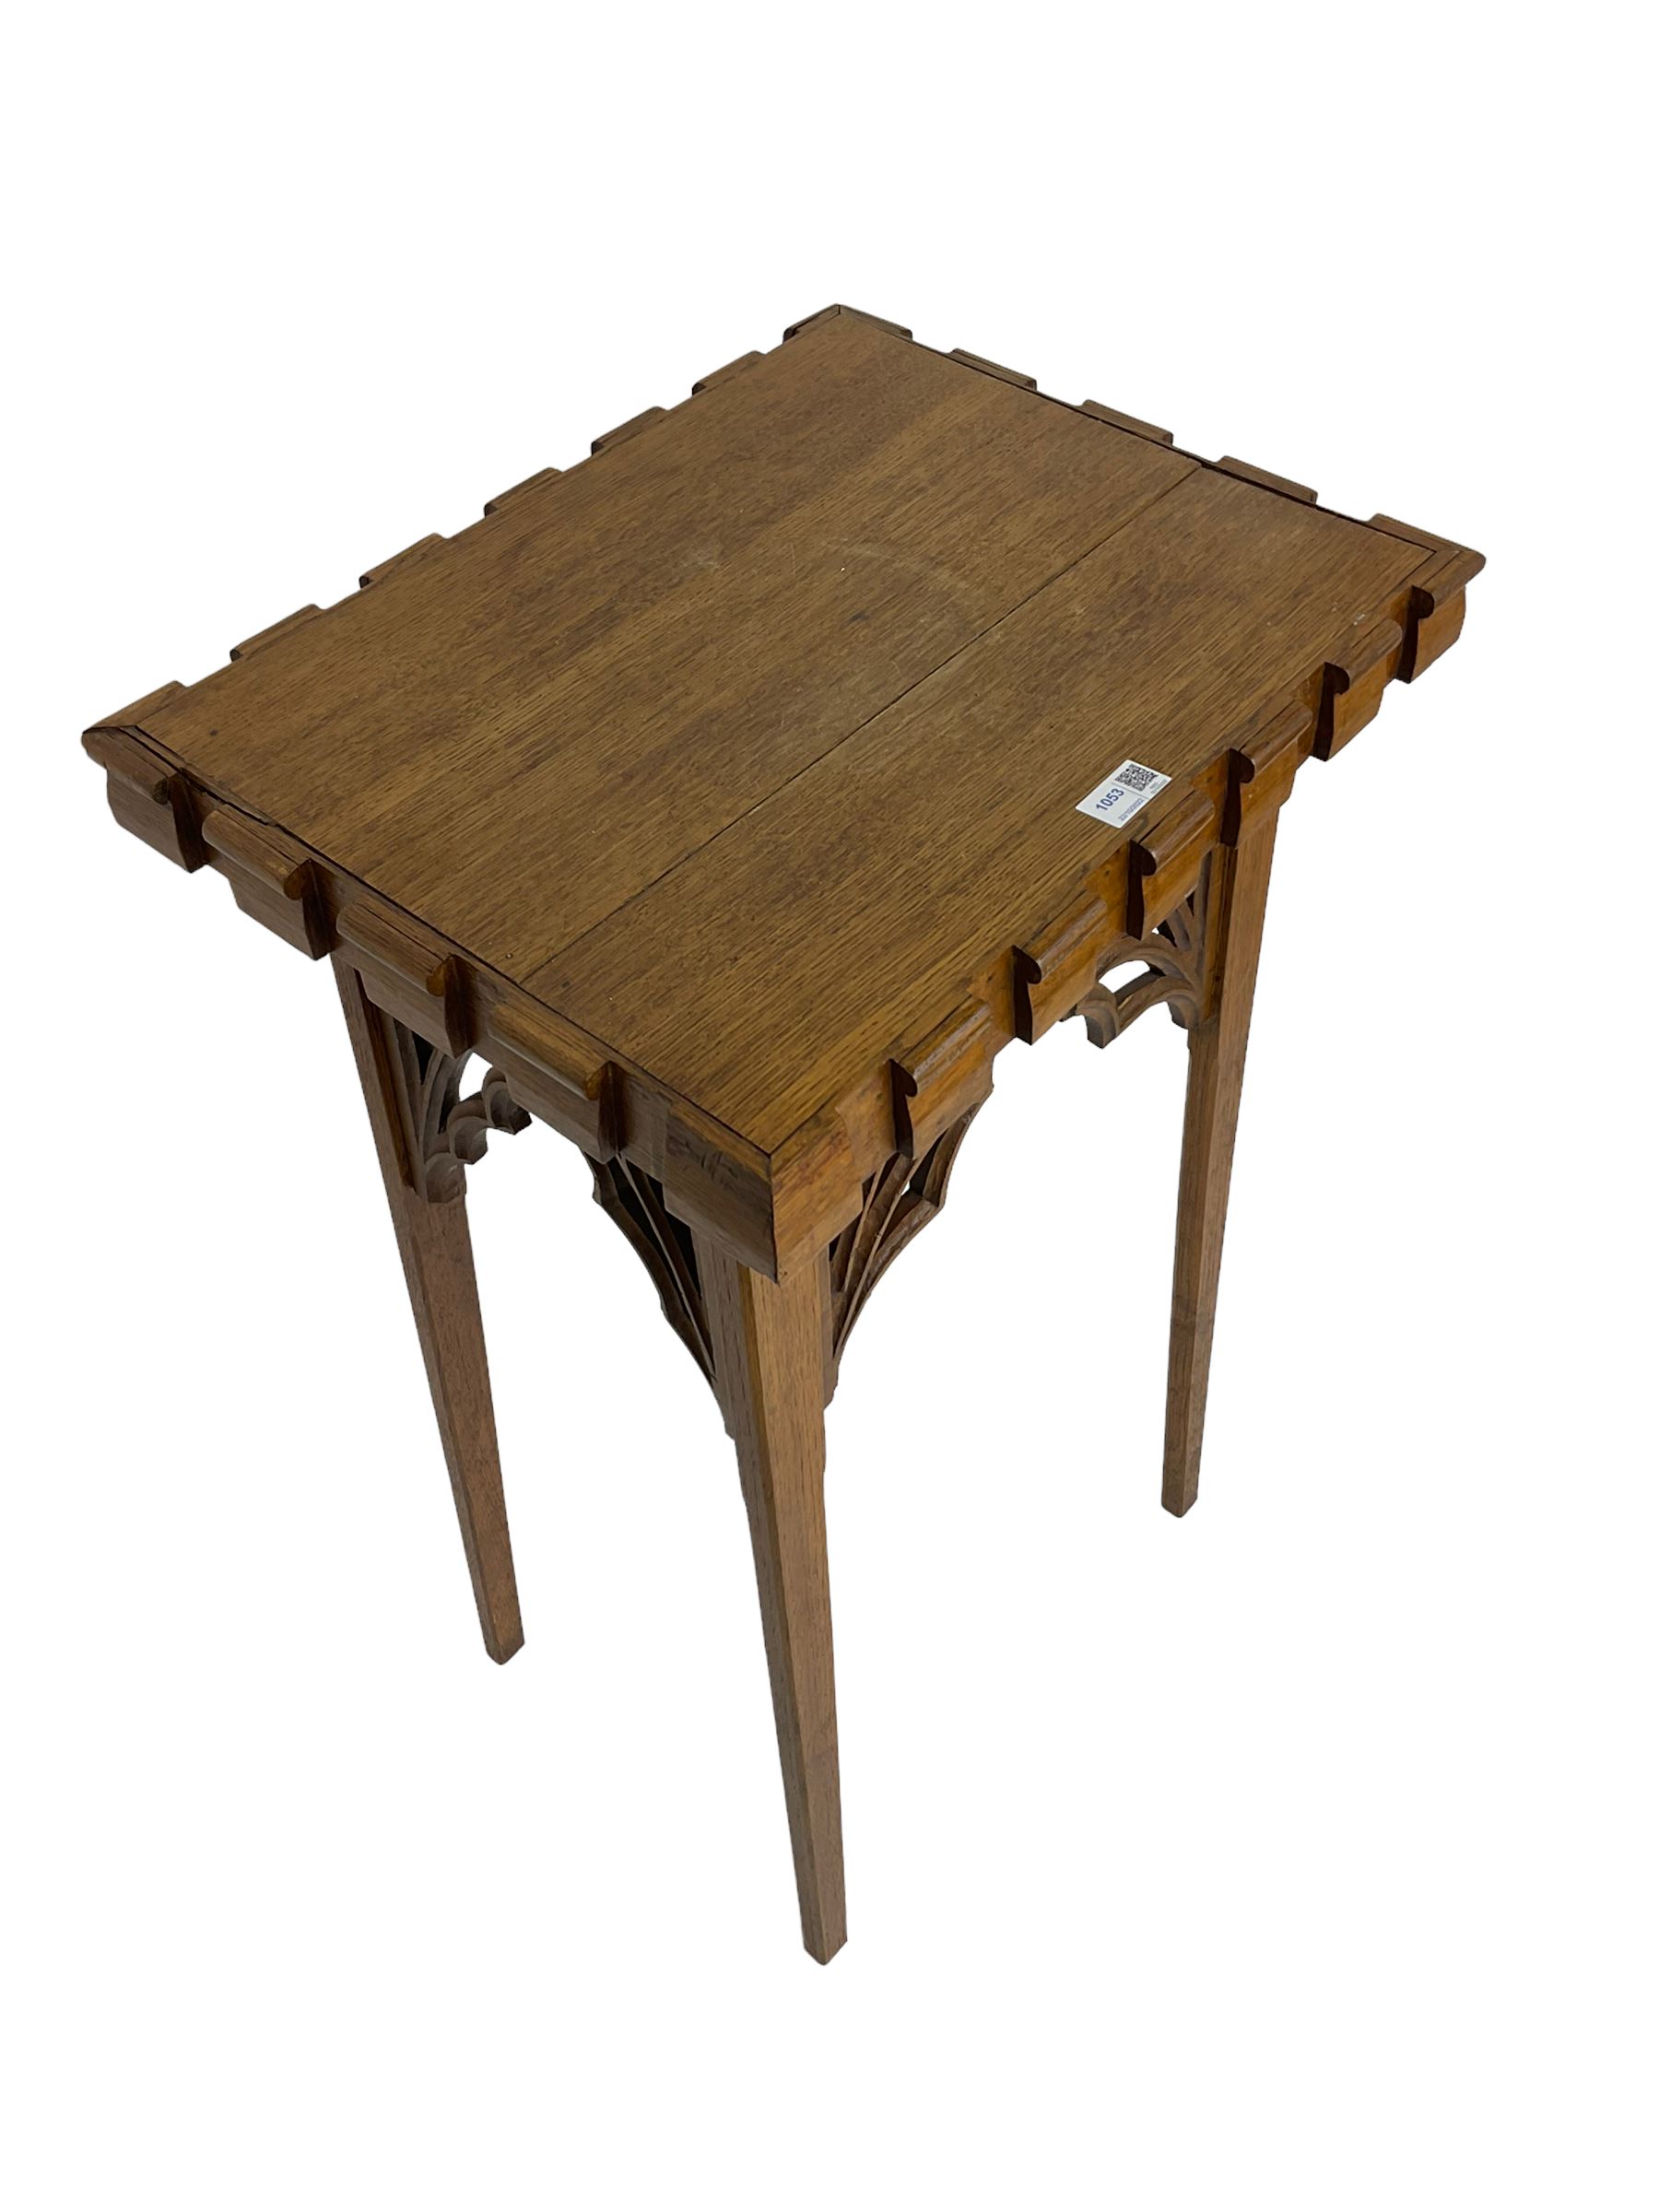 20th century ecclesiastical Gothic style oak stand - Image 3 of 6